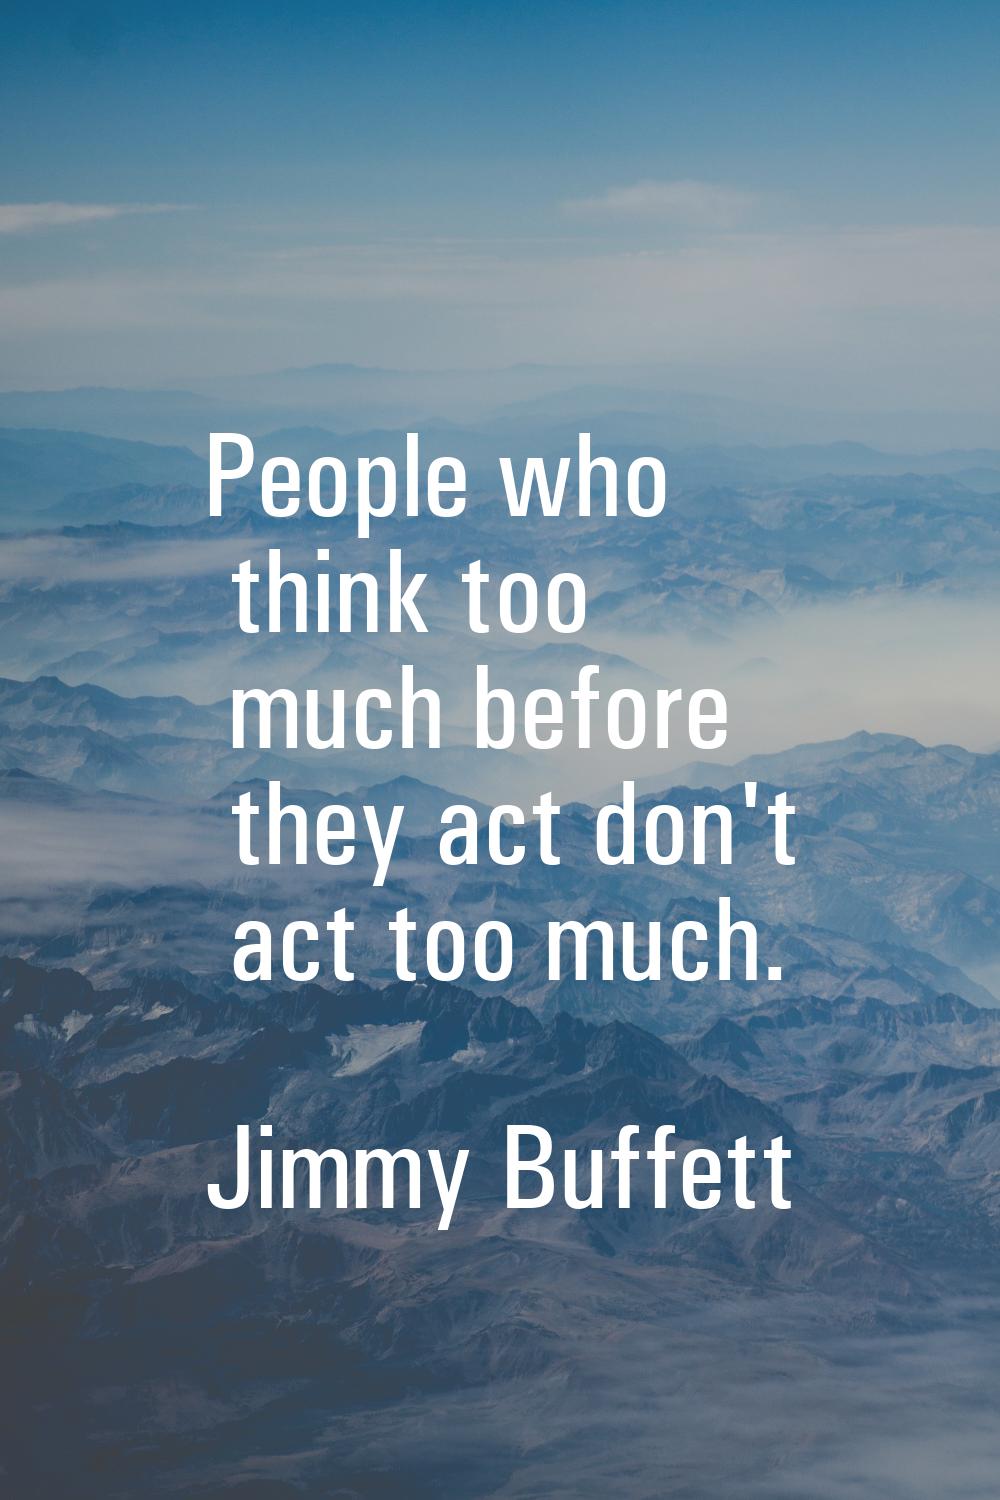 People who think too much before they act don't act too much.